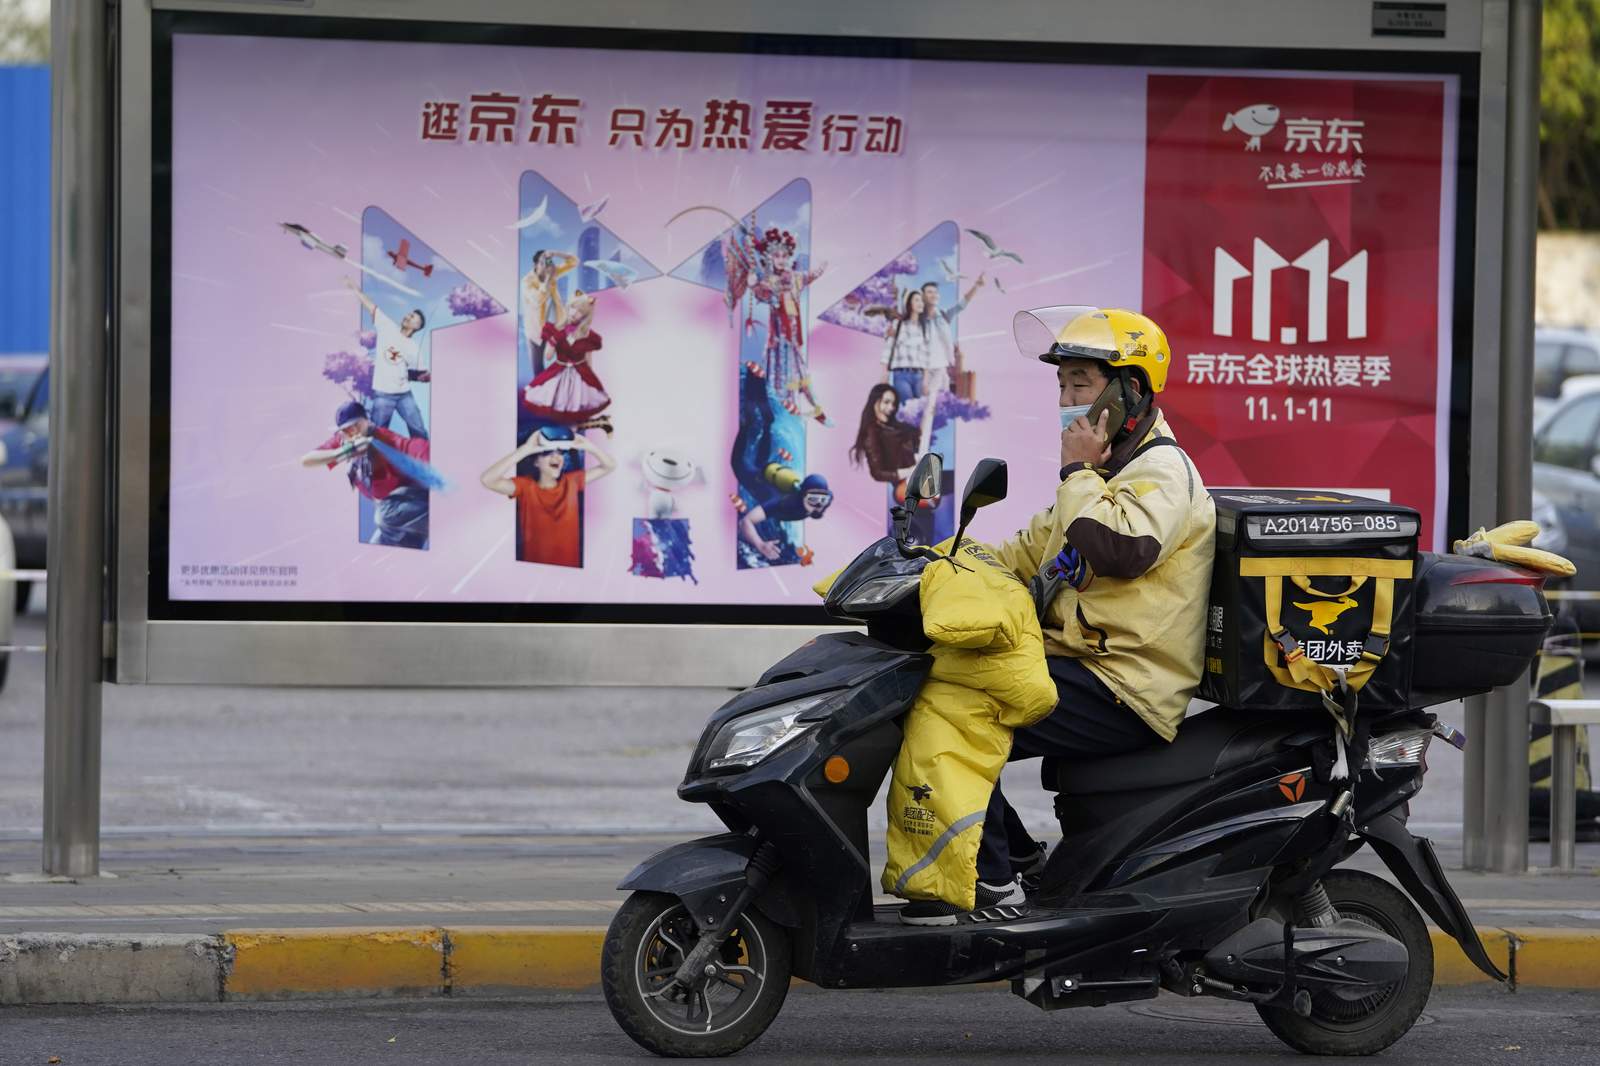 China gears up for world’s largest online shopping festival